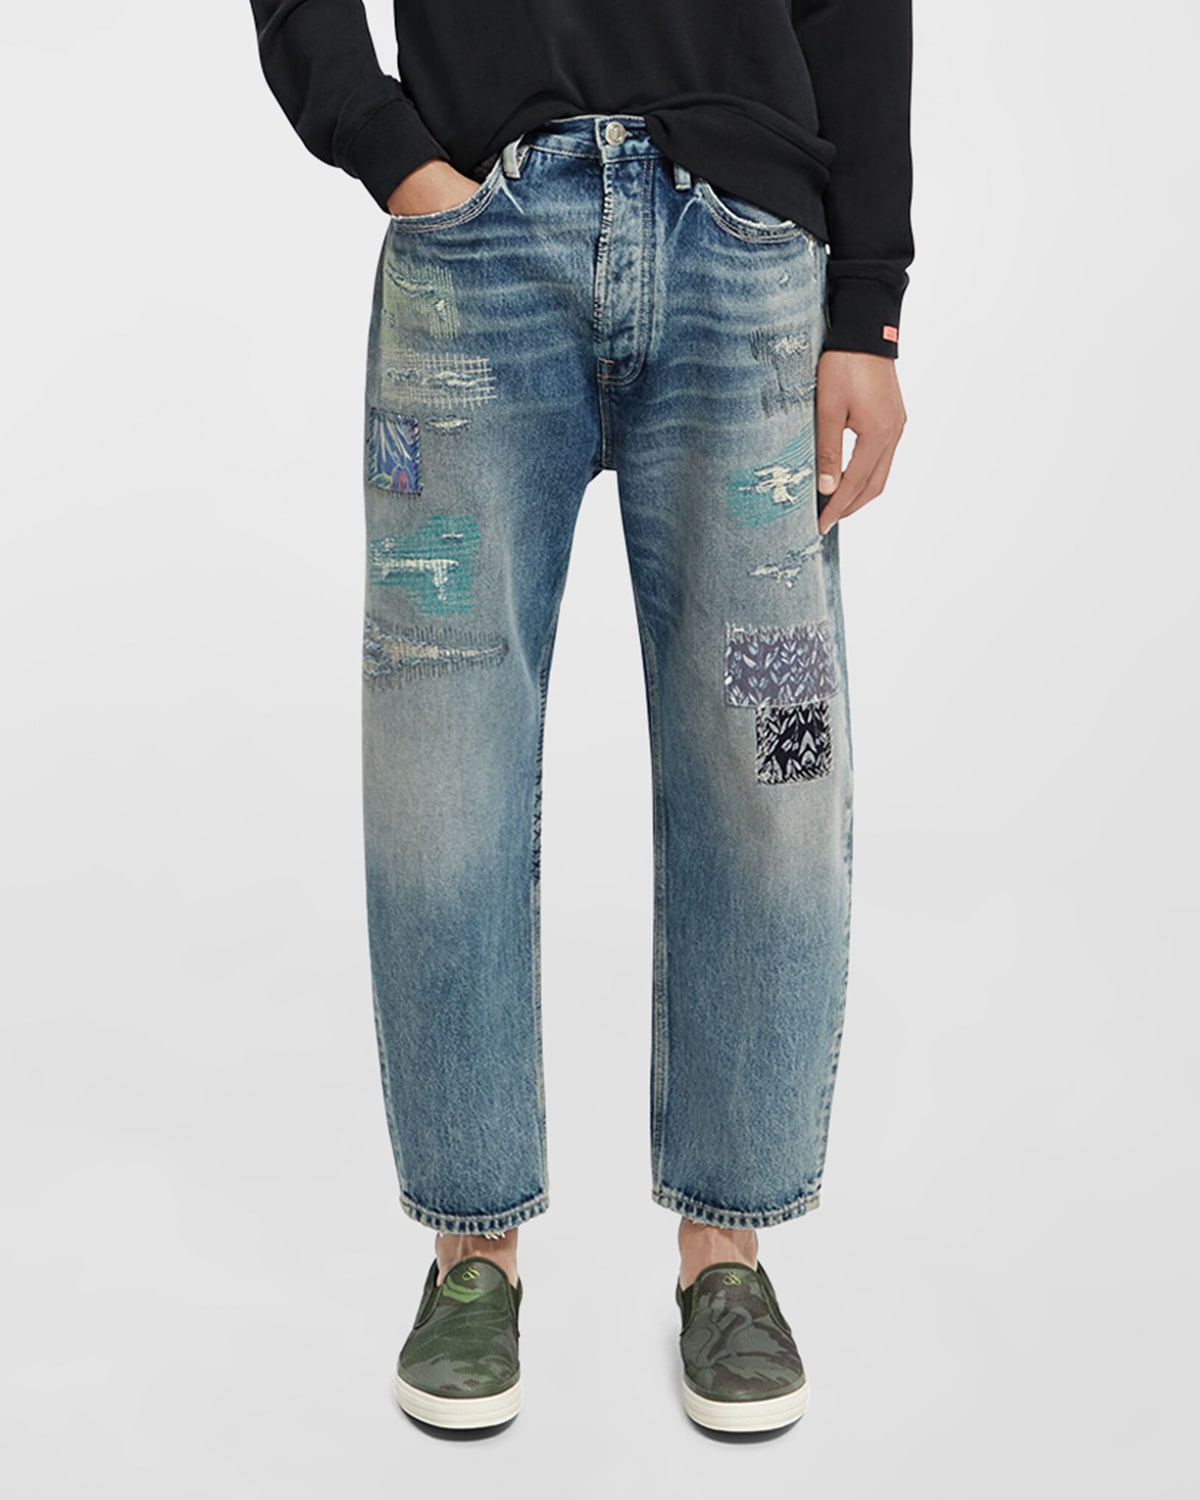 Men's The Strand Premium Patched Jeans